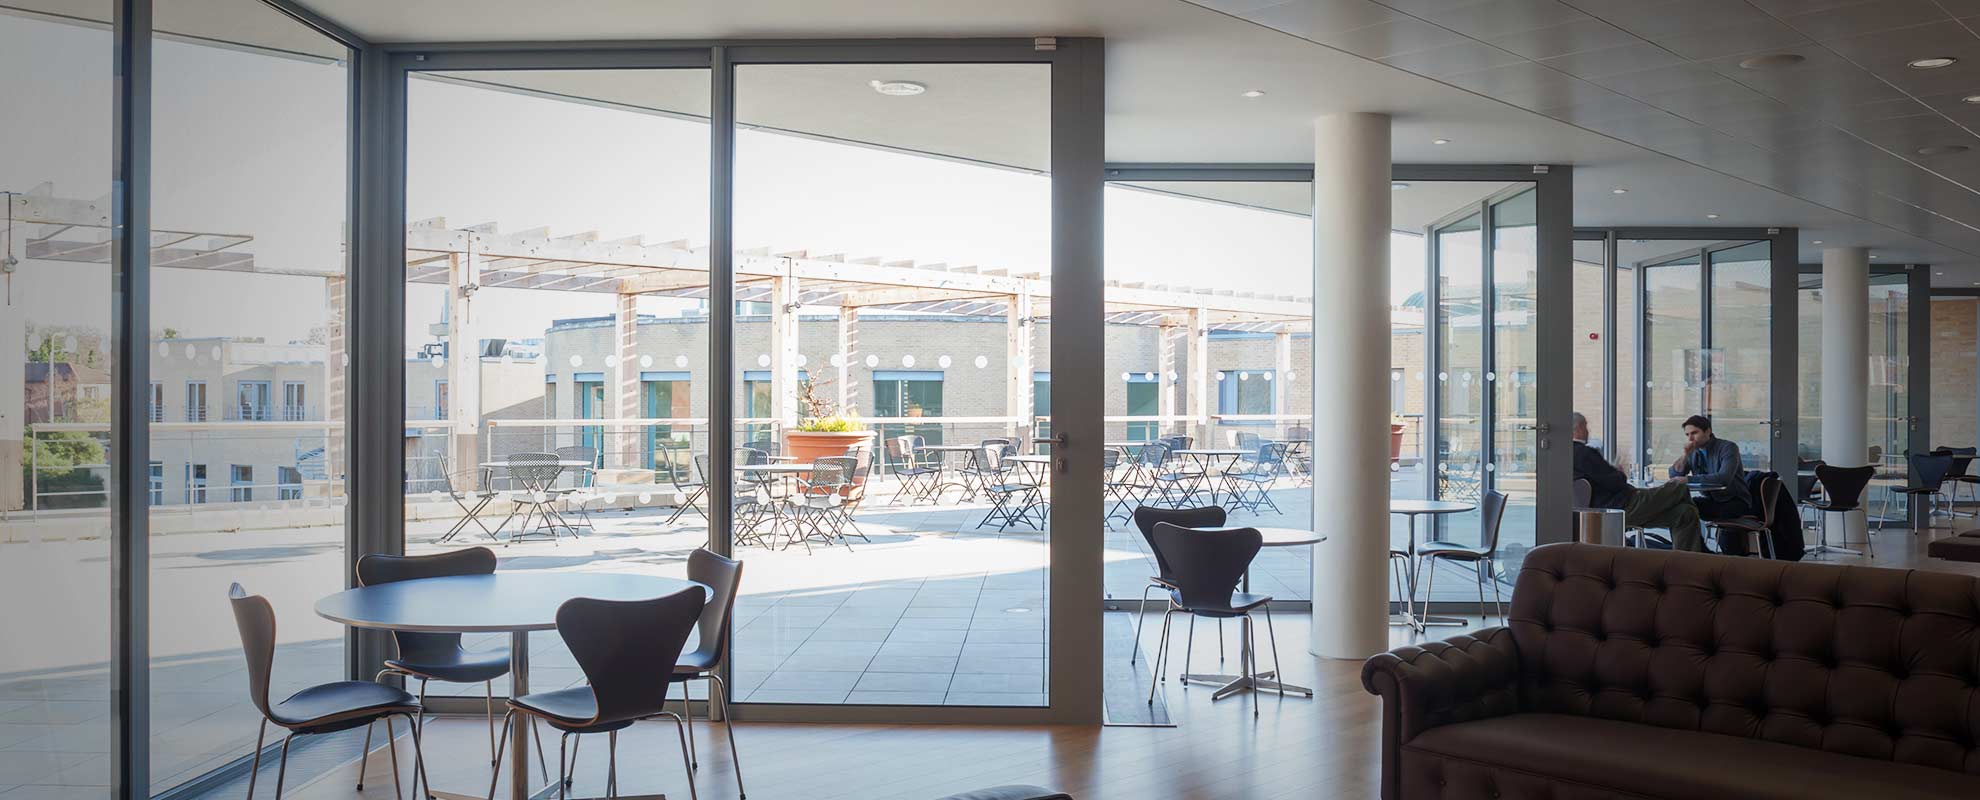 Aluminium sliding doors designed and installed for Said Business School in Oxford